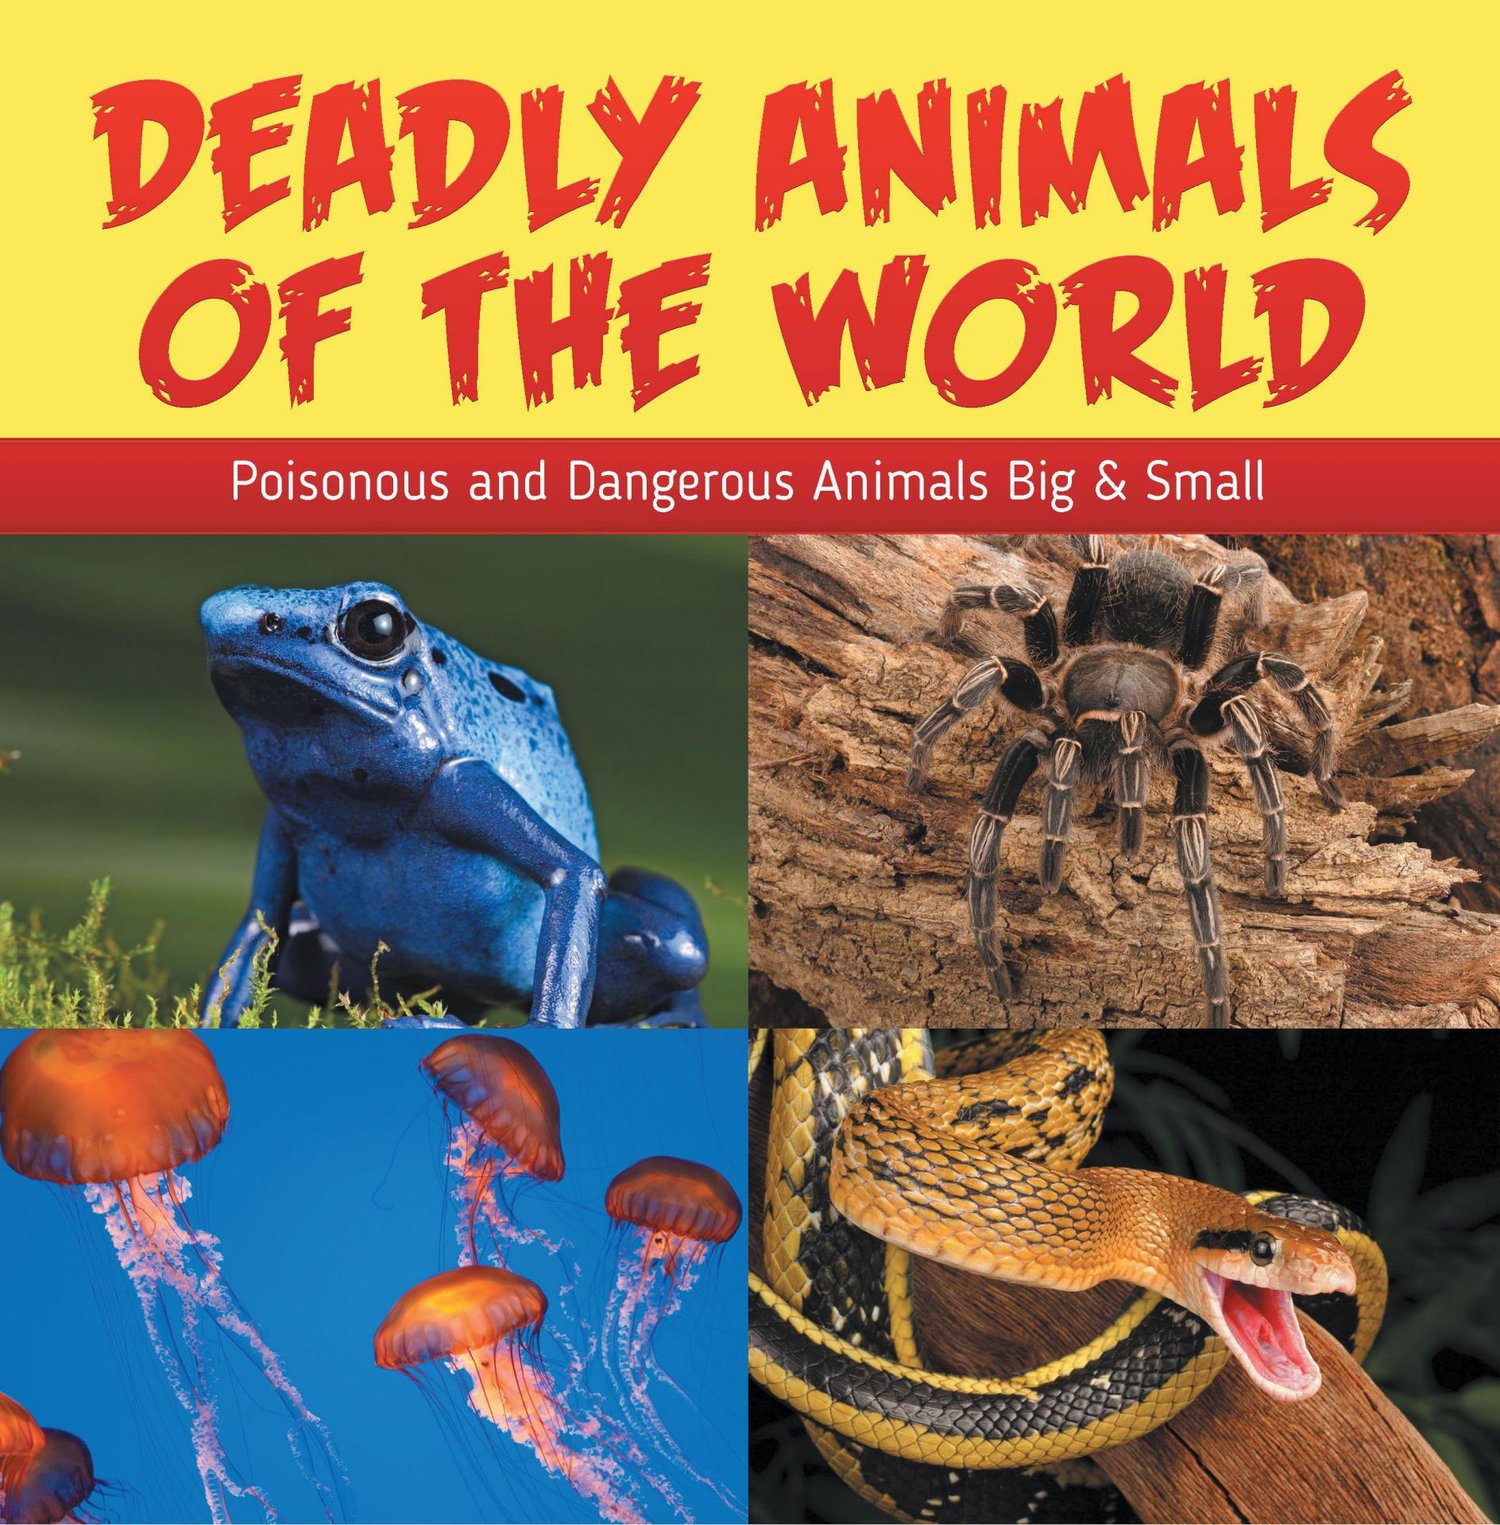 Animals in danger at present. World's Deadliest animals. @ Poisonous World. The most Dangerous animal of all книга. Reading Dangerous animals of the World reading.